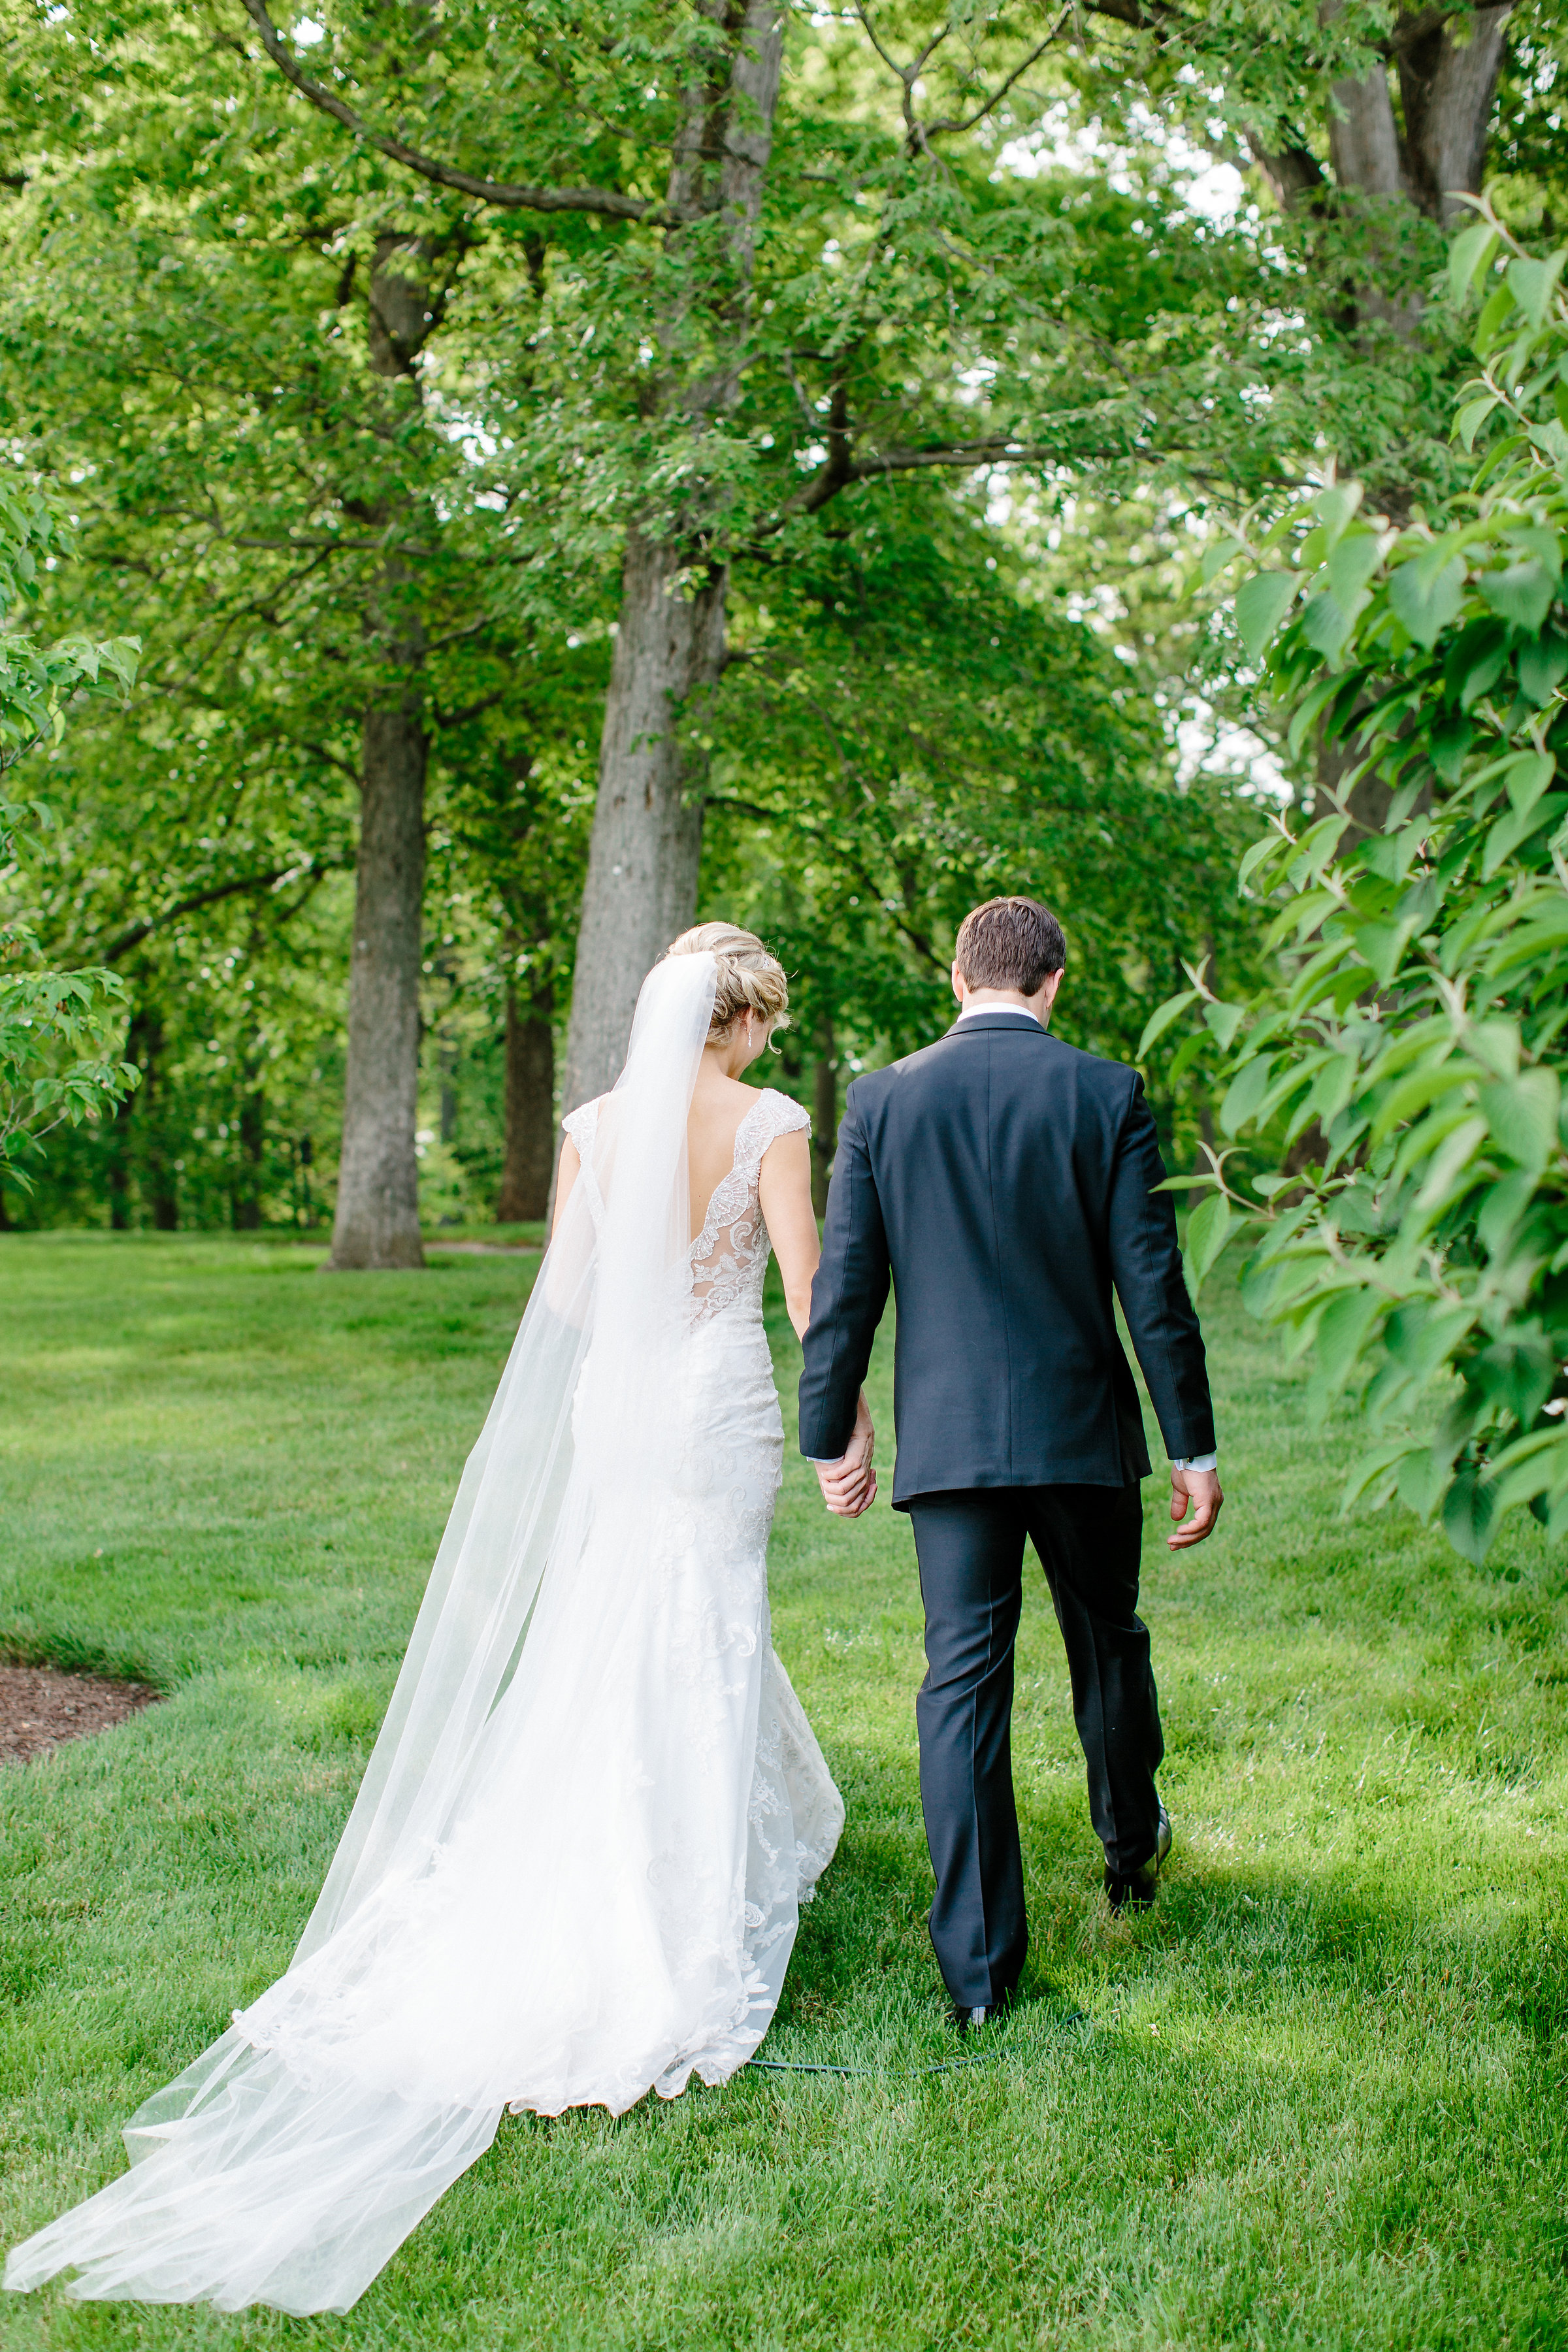 35 IMG 9294 - Cairnwood Estate Wedding Video: Fated Love